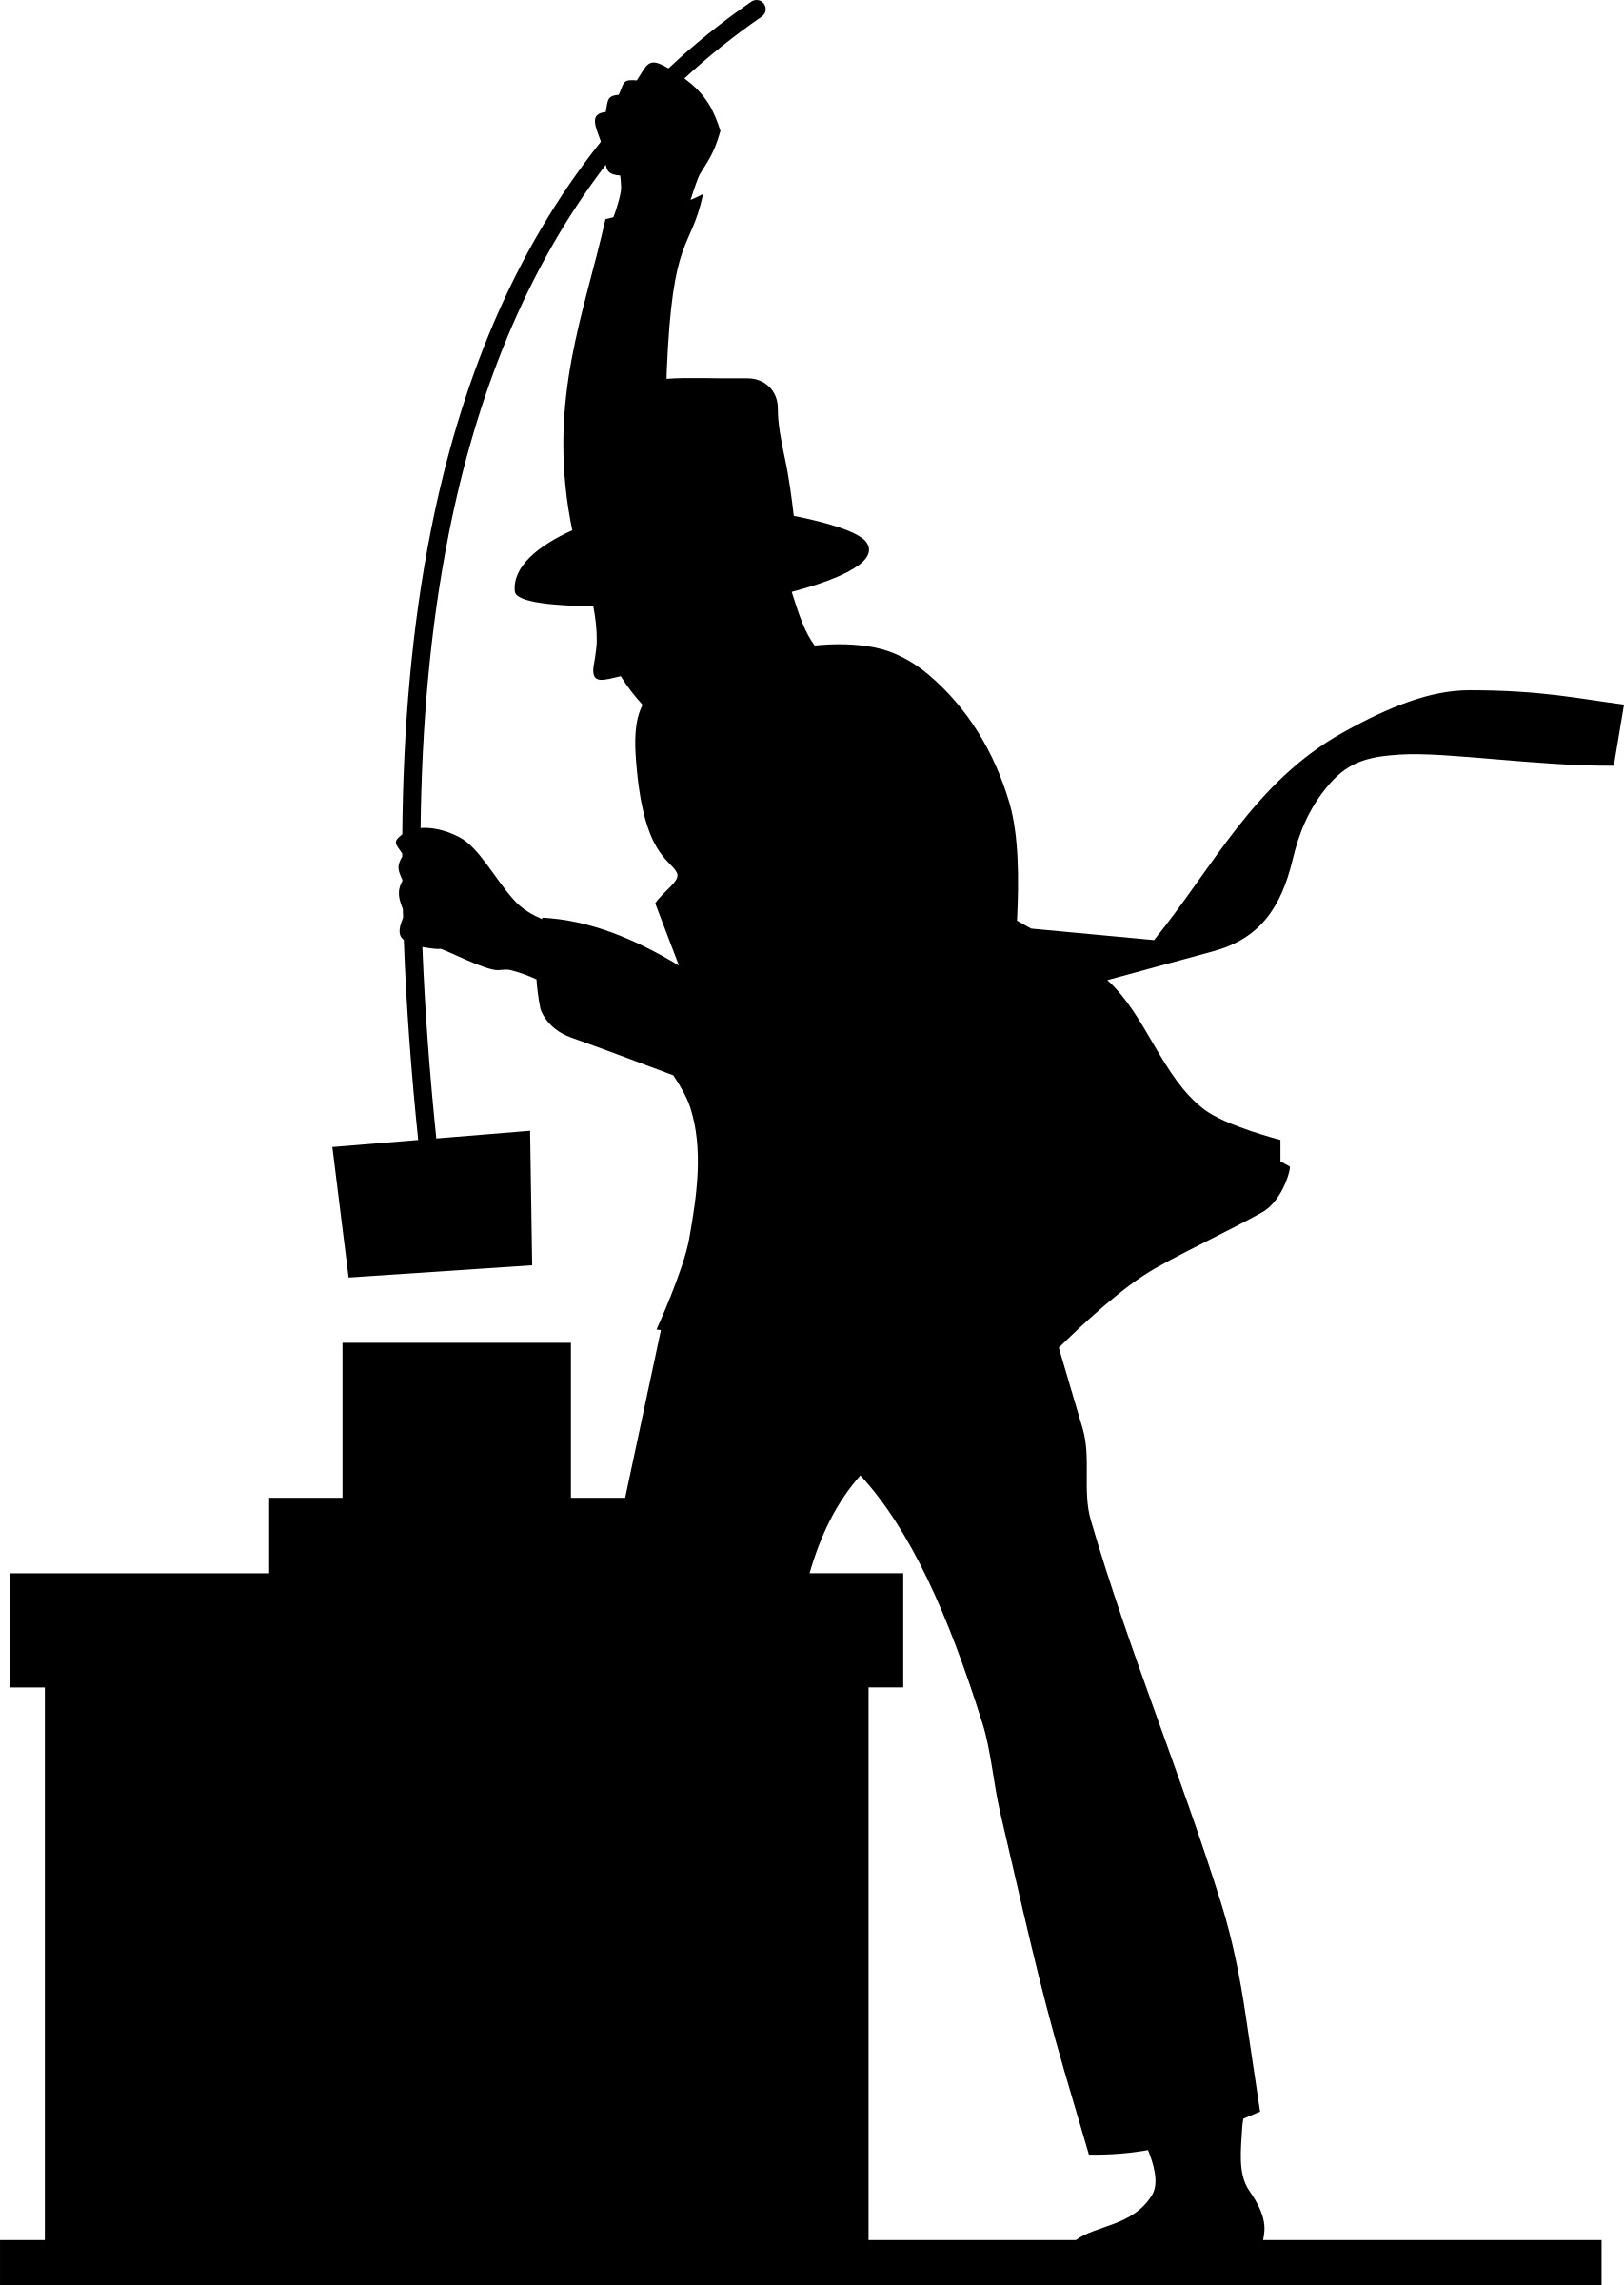 Chimney Sweeper Silhouette png icons